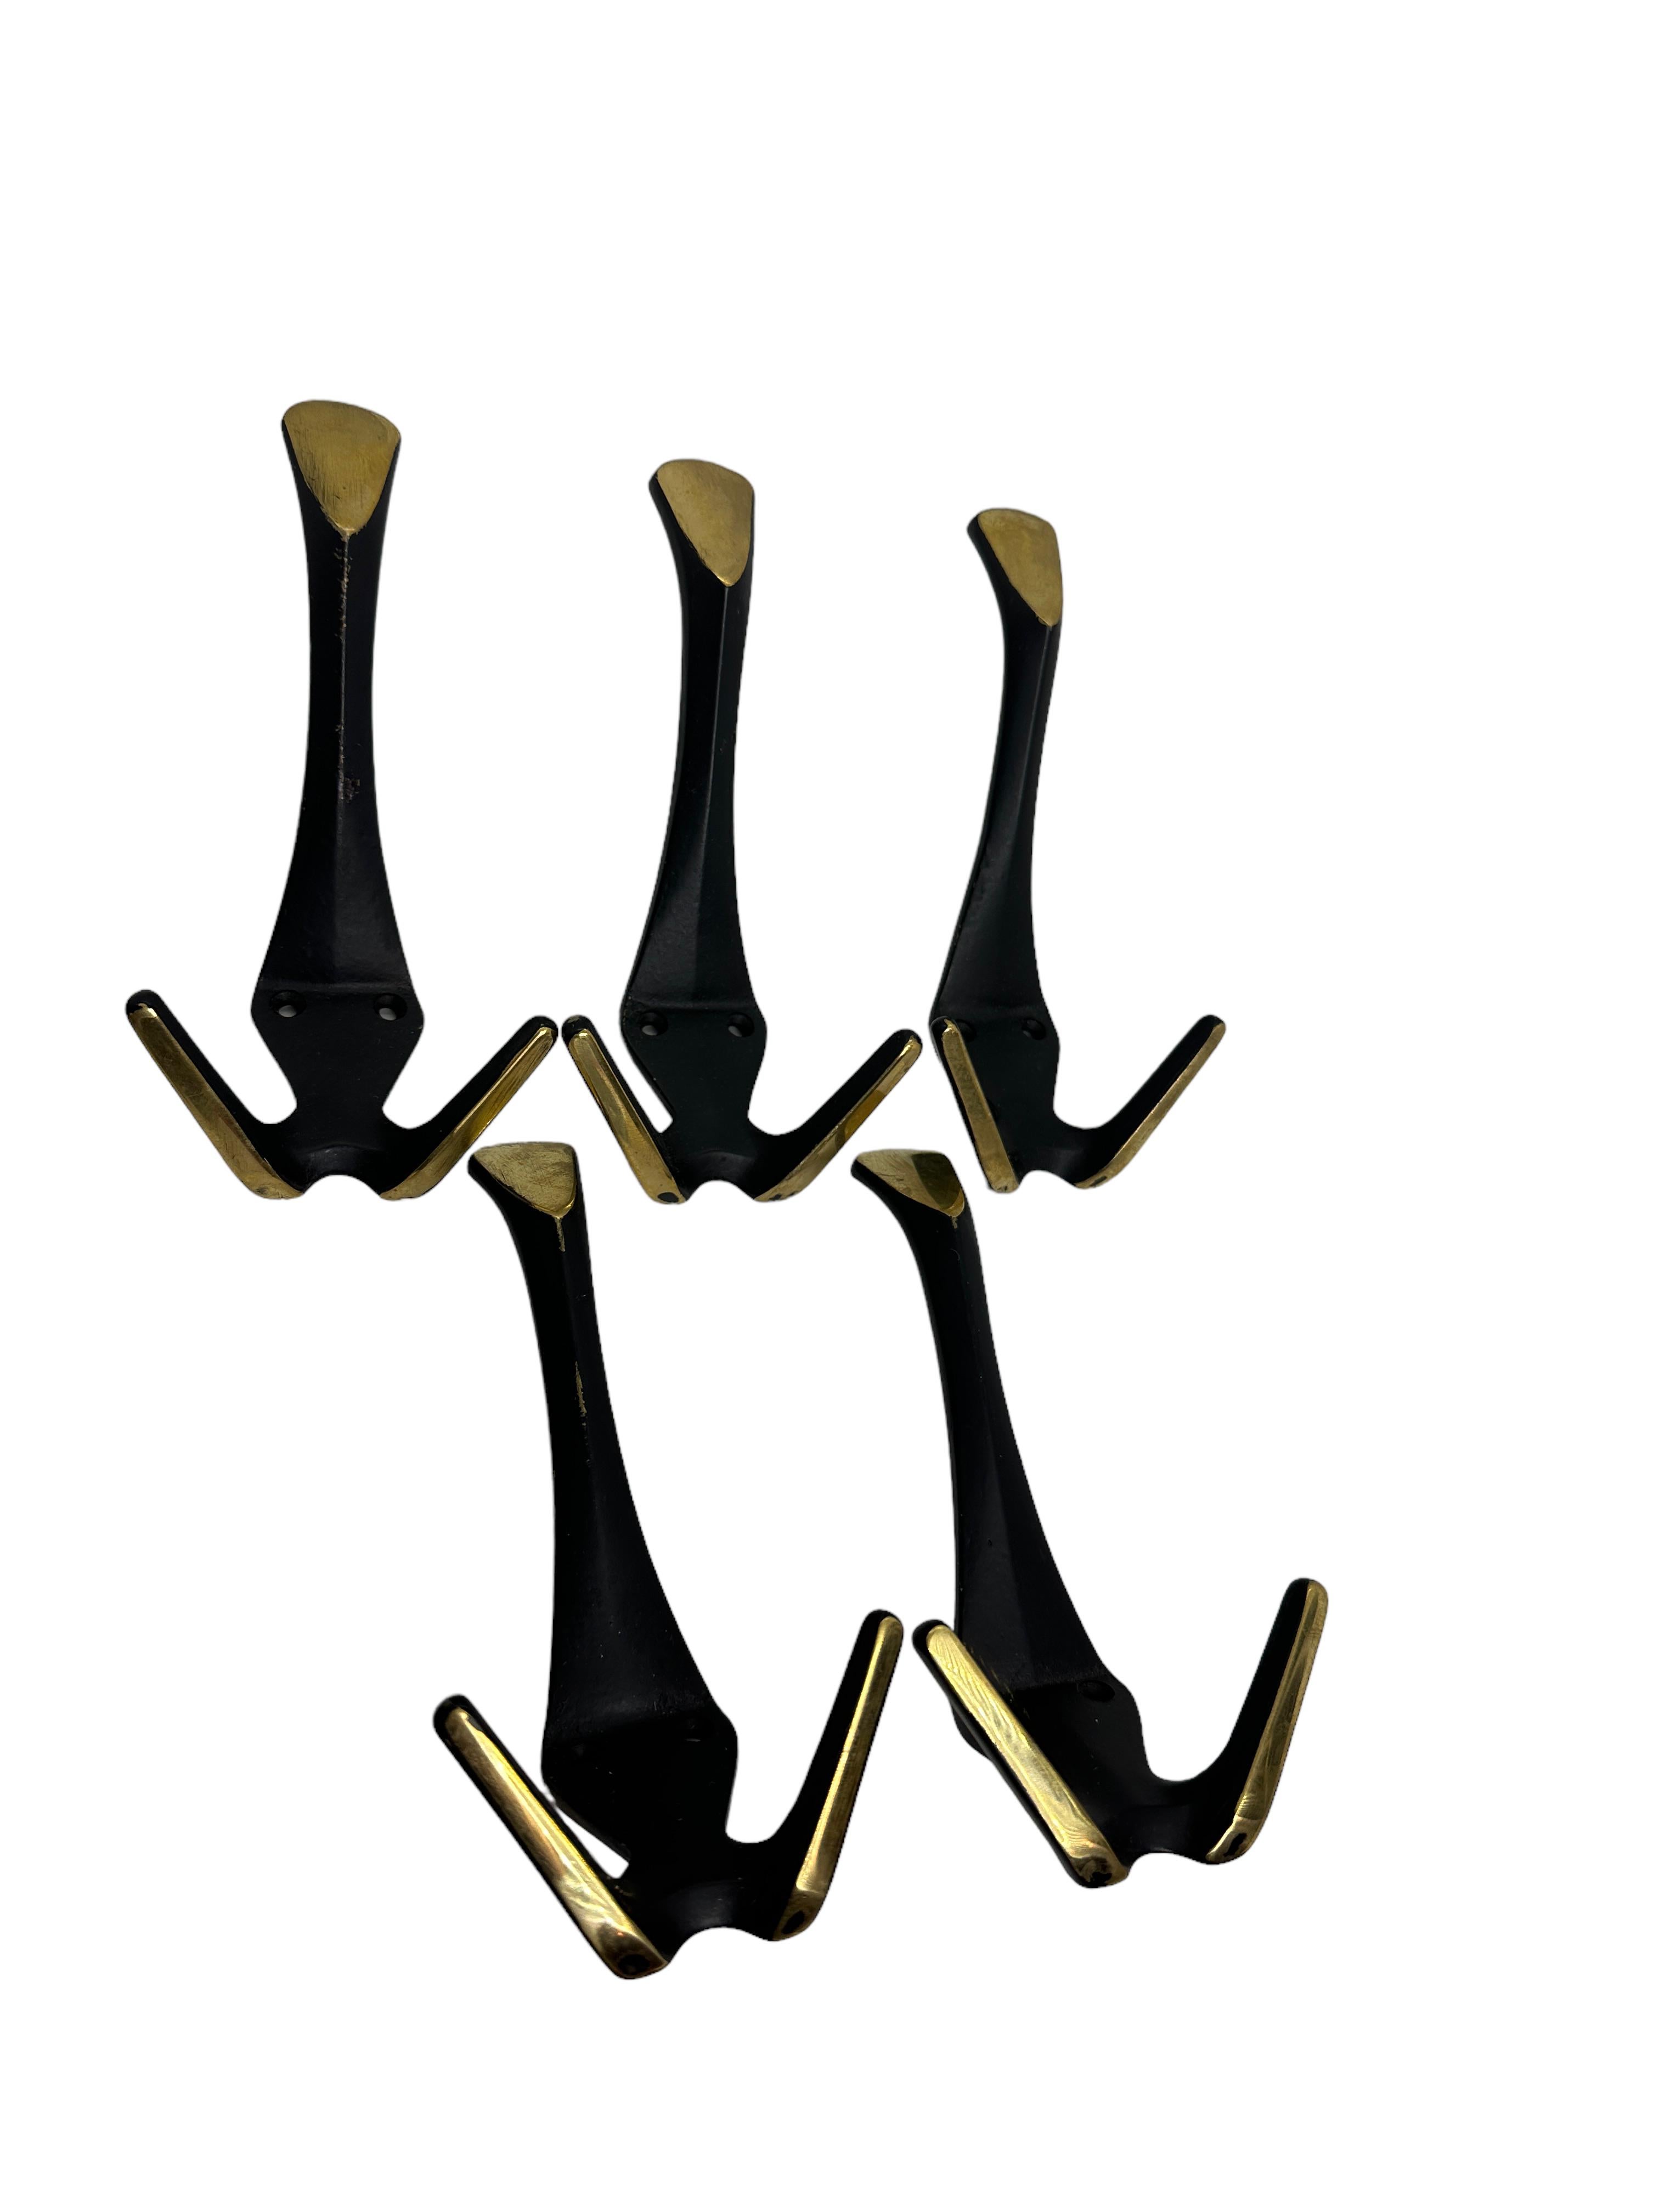 Metal Set of Five Coat Wall Coat Hooks, Black and Brass, Mid-Century Modern, 1950s For Sale